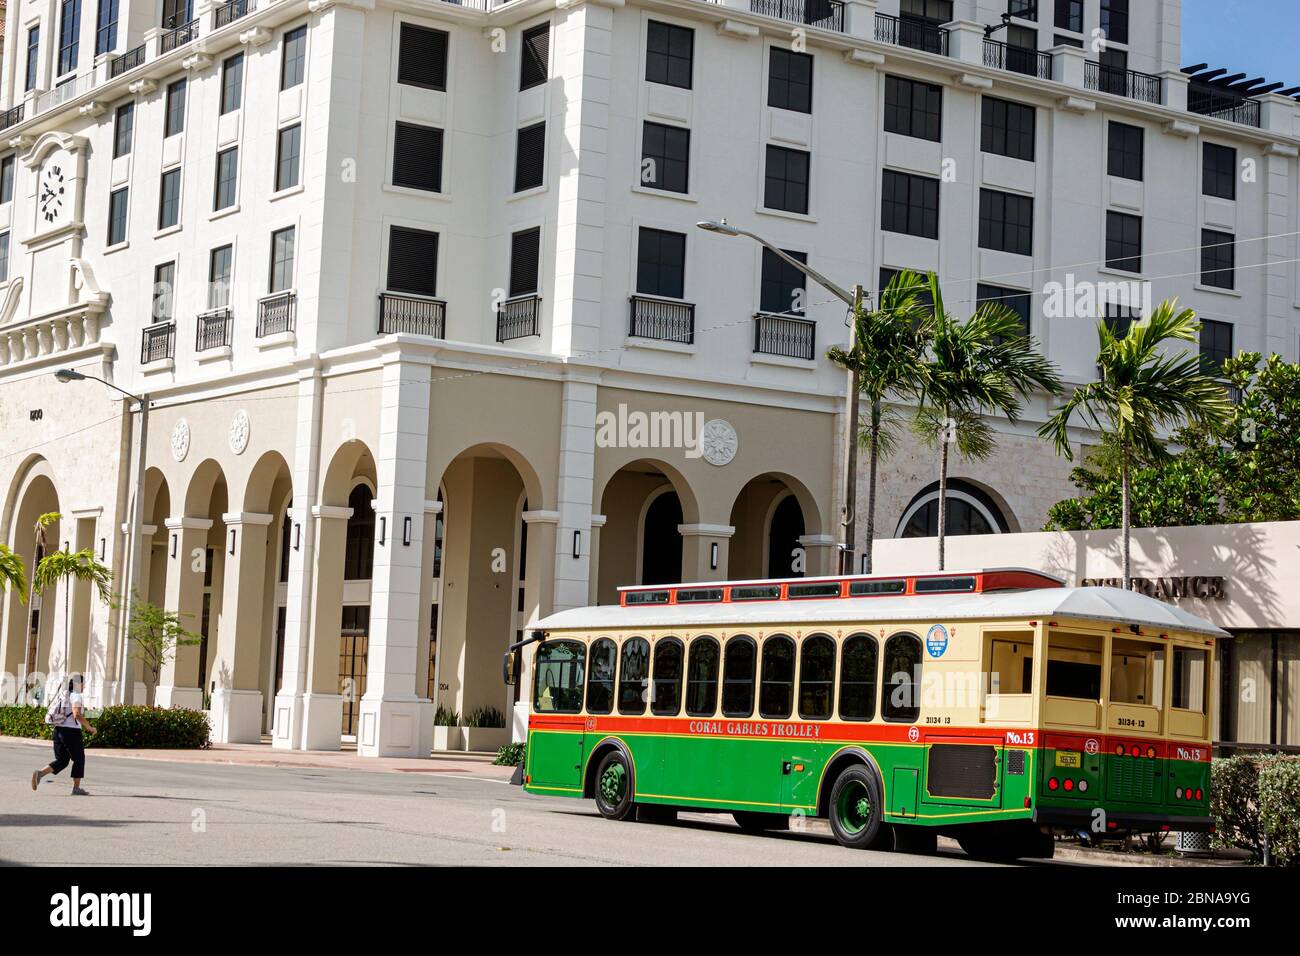 Miami Florida,Coral Gables,Ponce de Leon Boulevard,trolley,residential building,woman women female lady adult adults,pedestrian,crossing street,visito Stock Photo